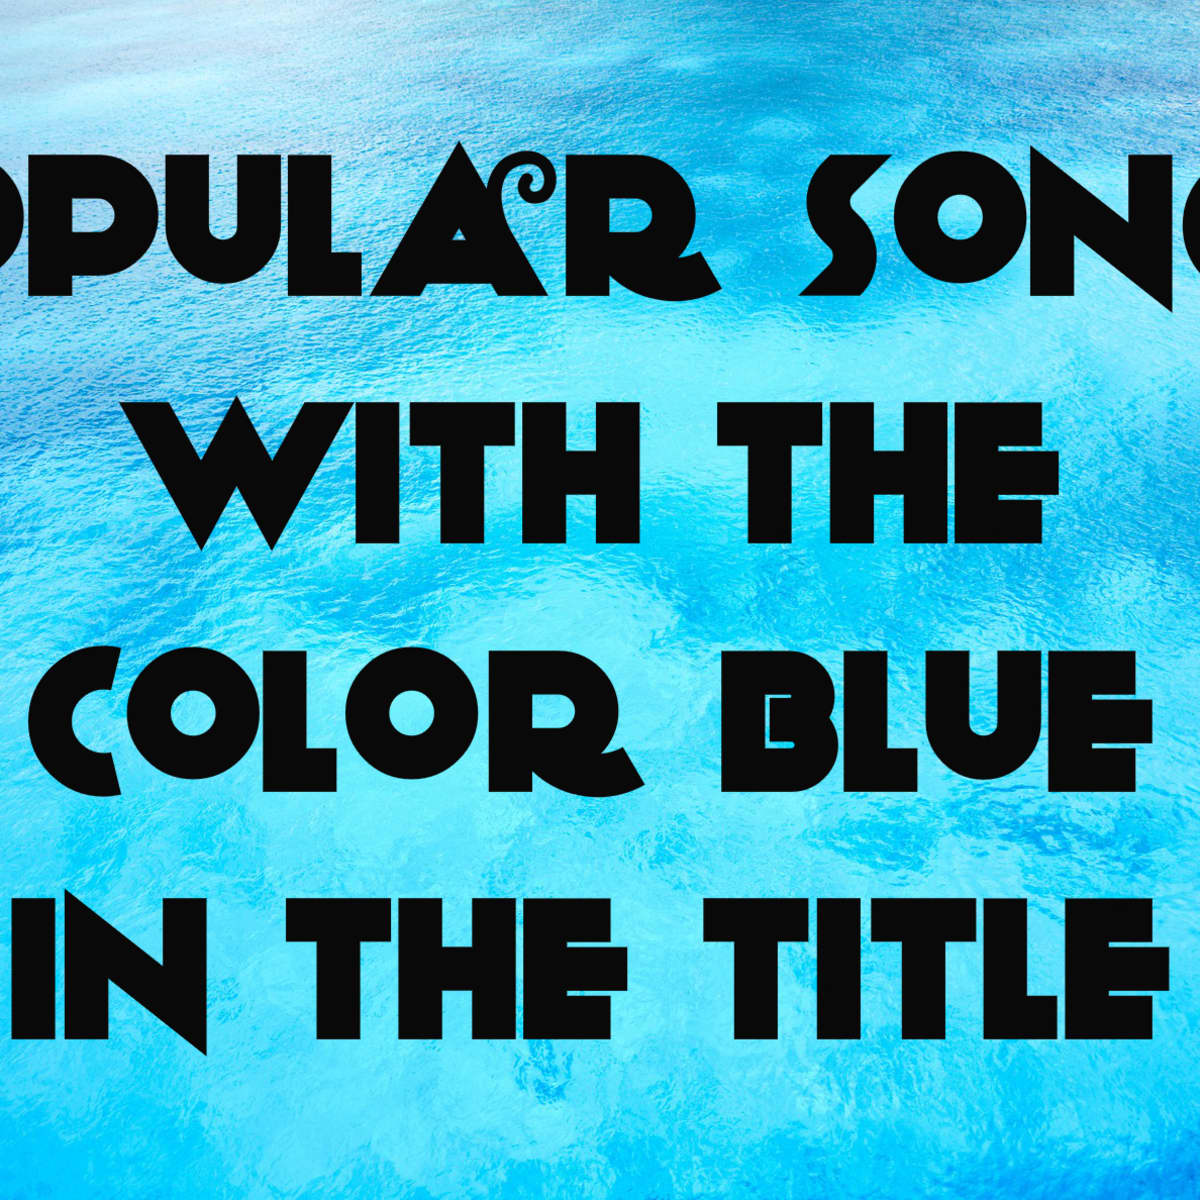 88 Popular Songs With the Color Blue in the Title - Spinditty